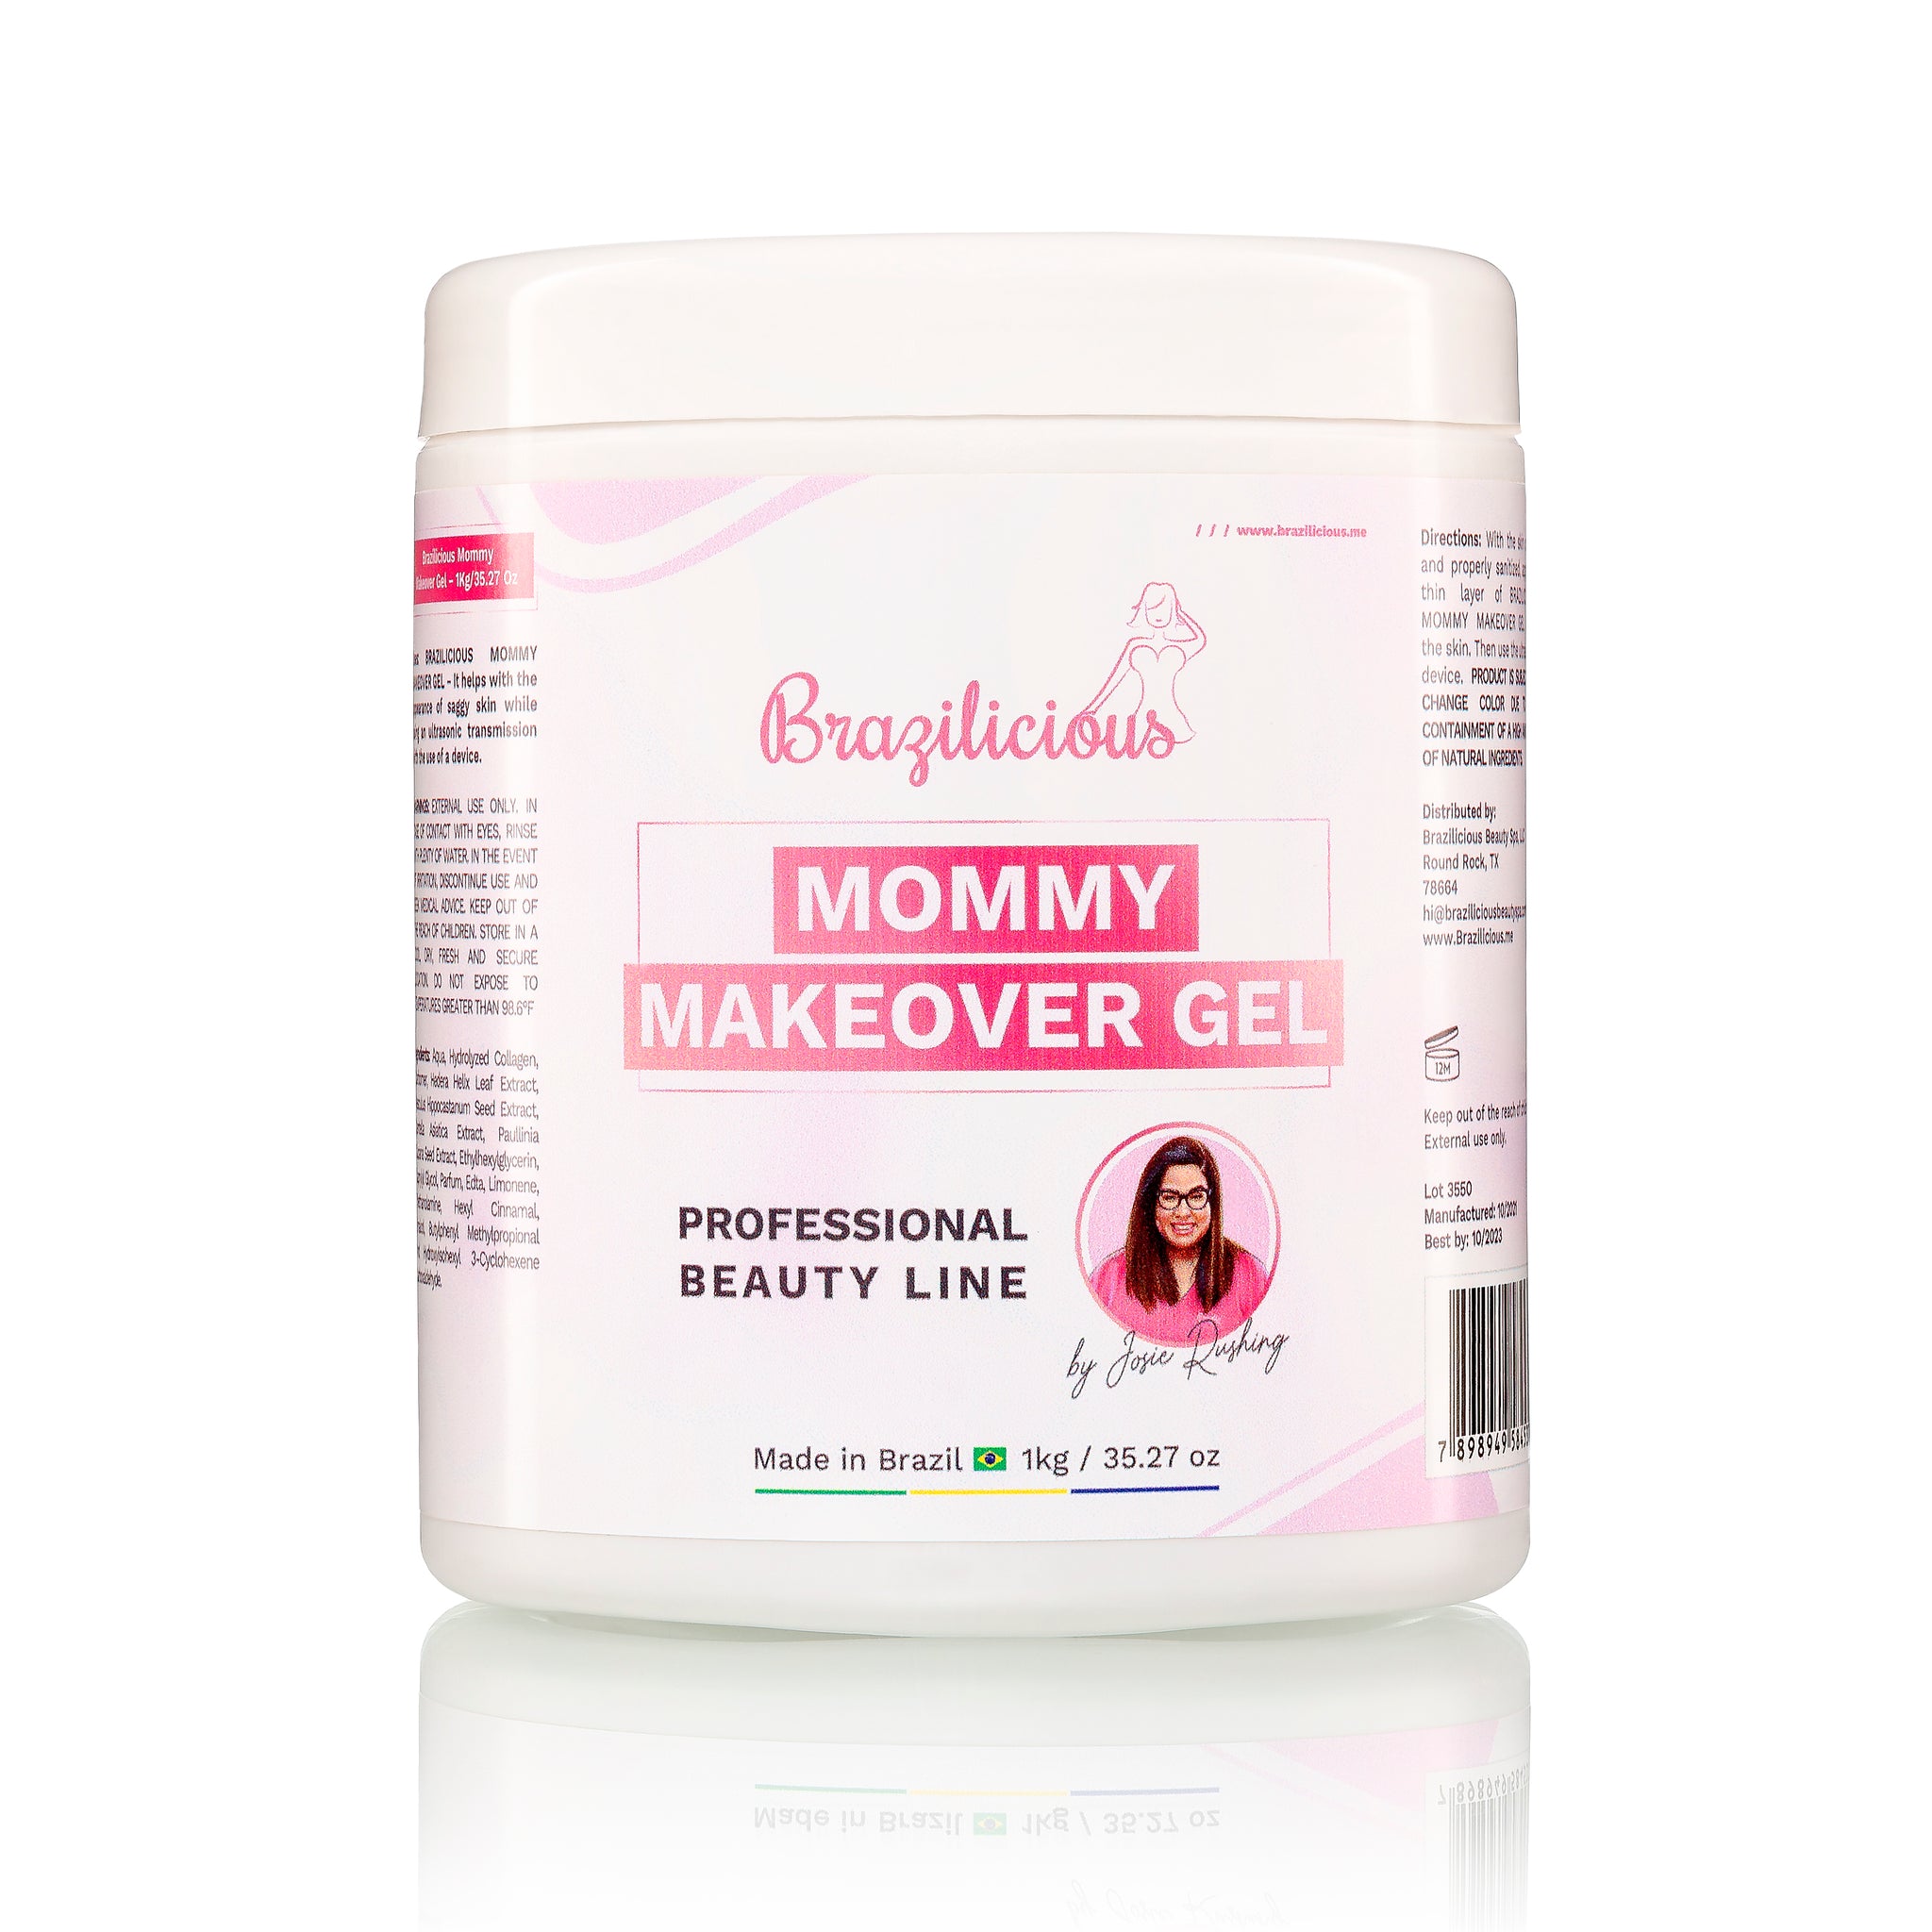 Brazilicious Mommy Makeover Gel